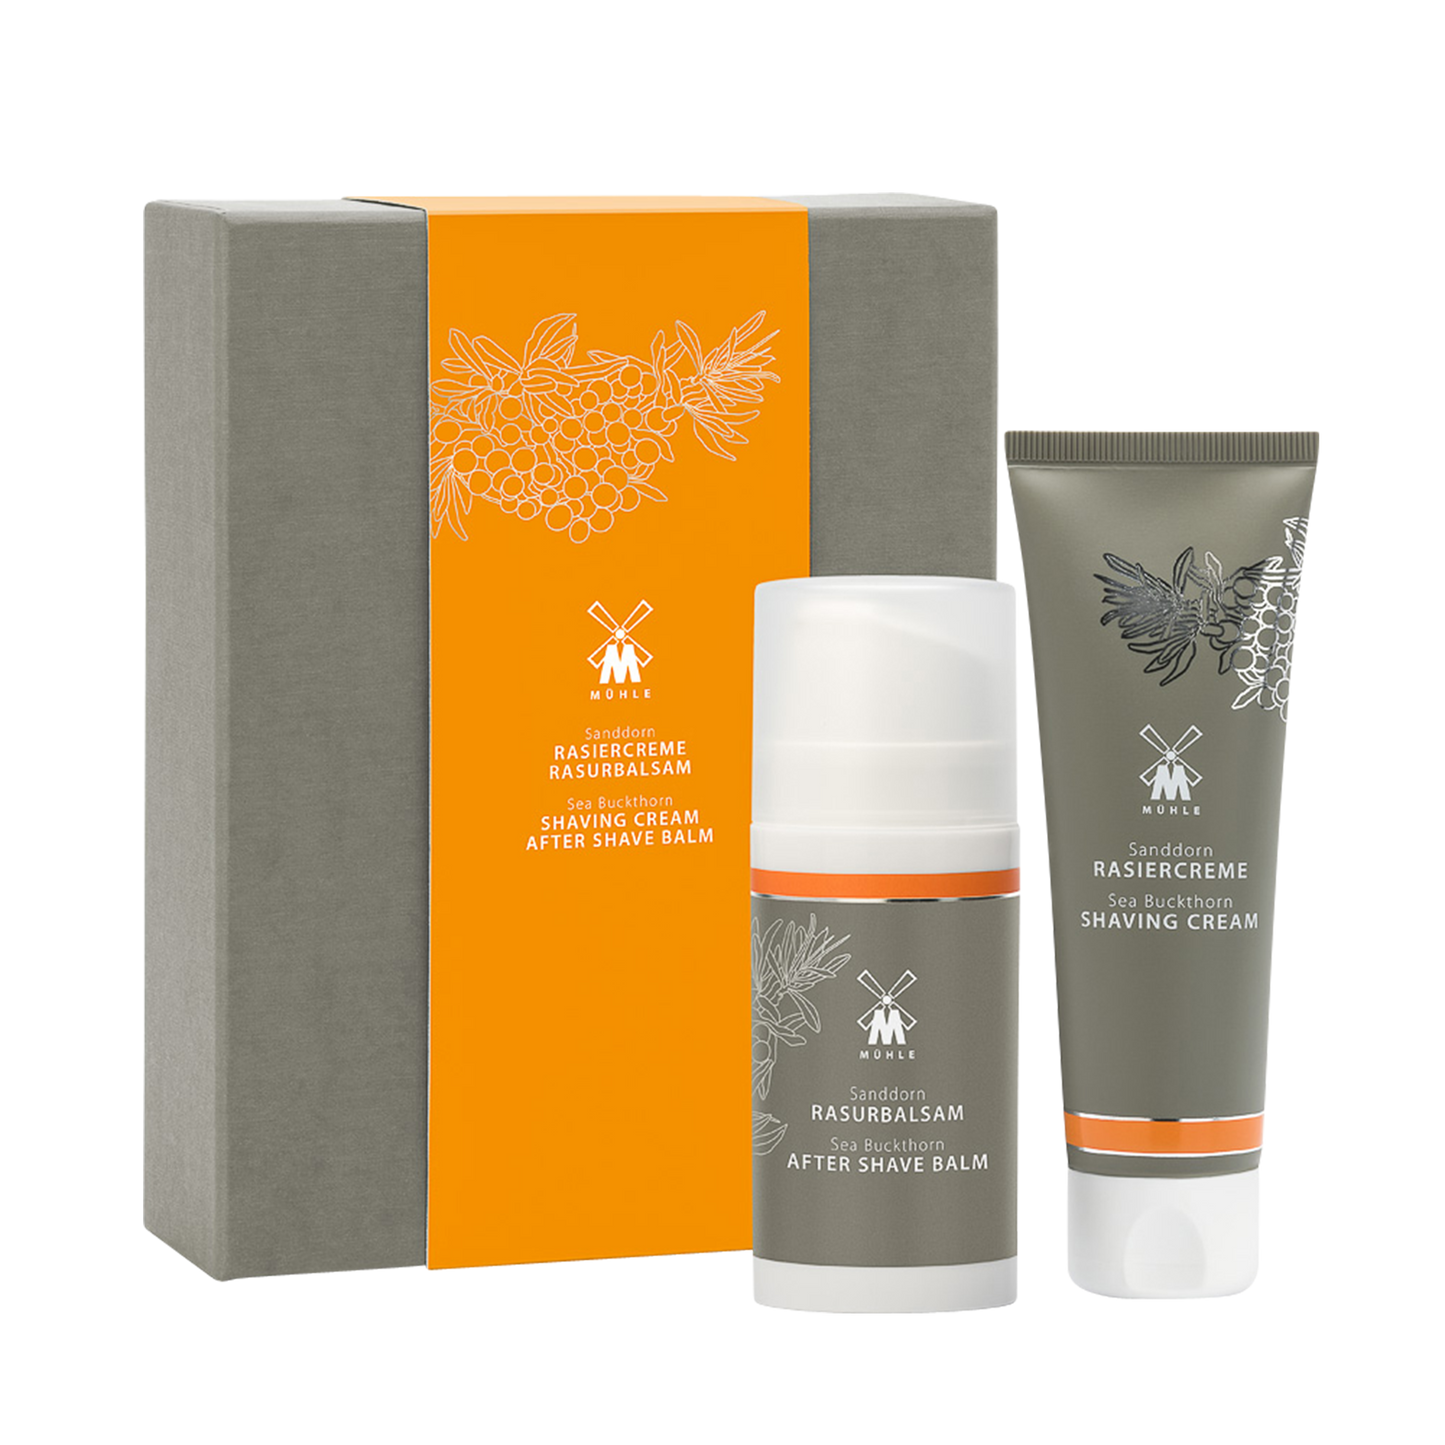 MUHLE Sea Buckthorn Shaving Cream & Aftershave Set: Suitable for all skin types. Gently calming and revitalizing, this skin care set's scent is obtained from plants in various coastal areas. Sea buckthorn is rich in palmitic acid, supporting the natural regeneration of your skin's cell structure. Citrus and fresh, this fragrance contains fine notes of lime and orange.